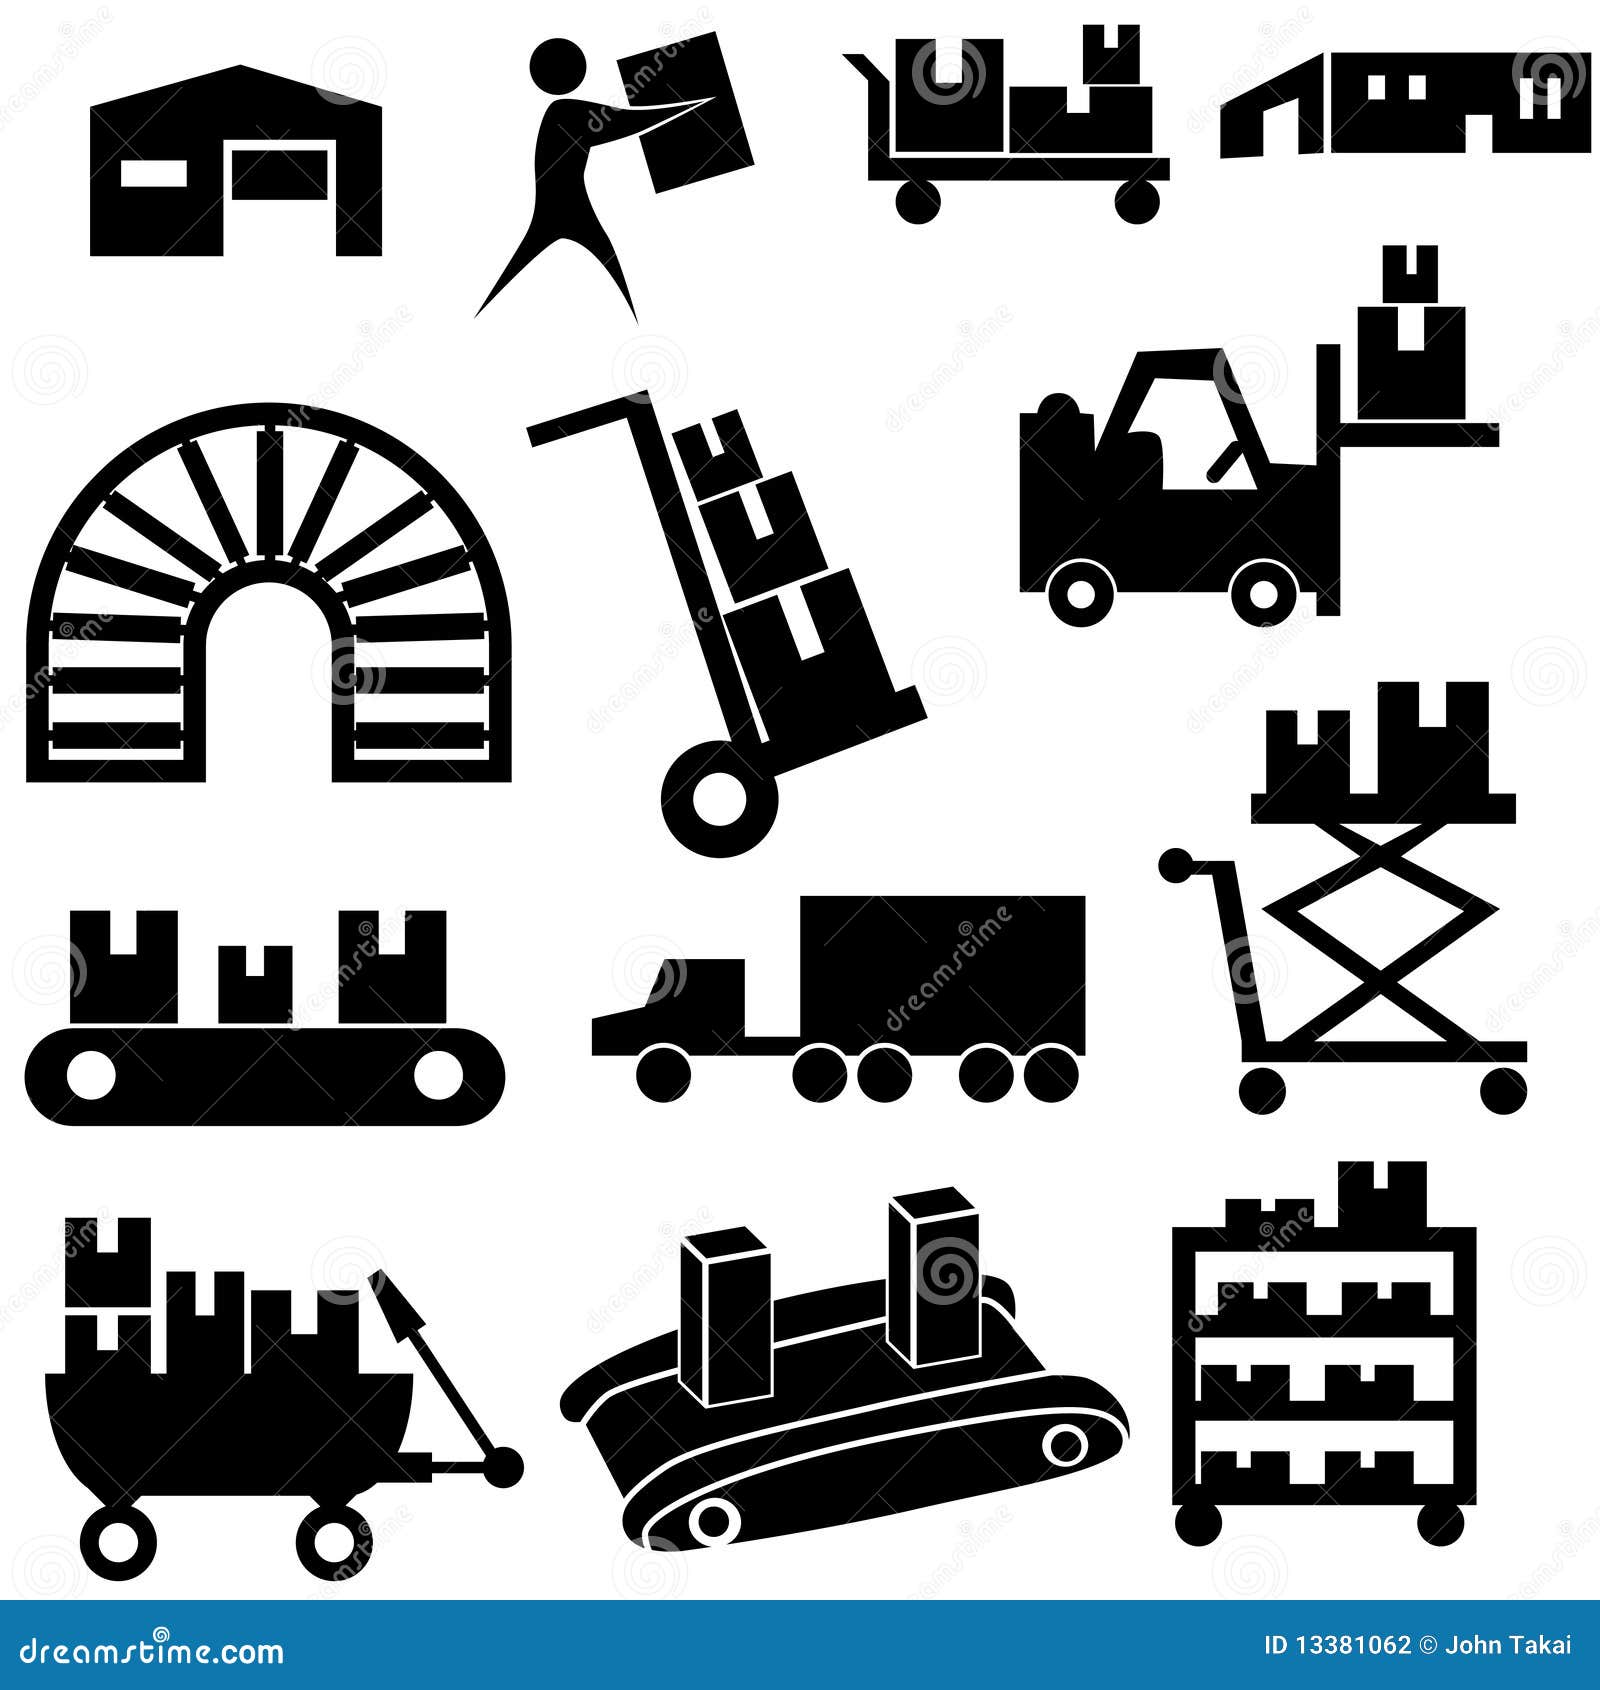 clipart manufacturing - photo #19